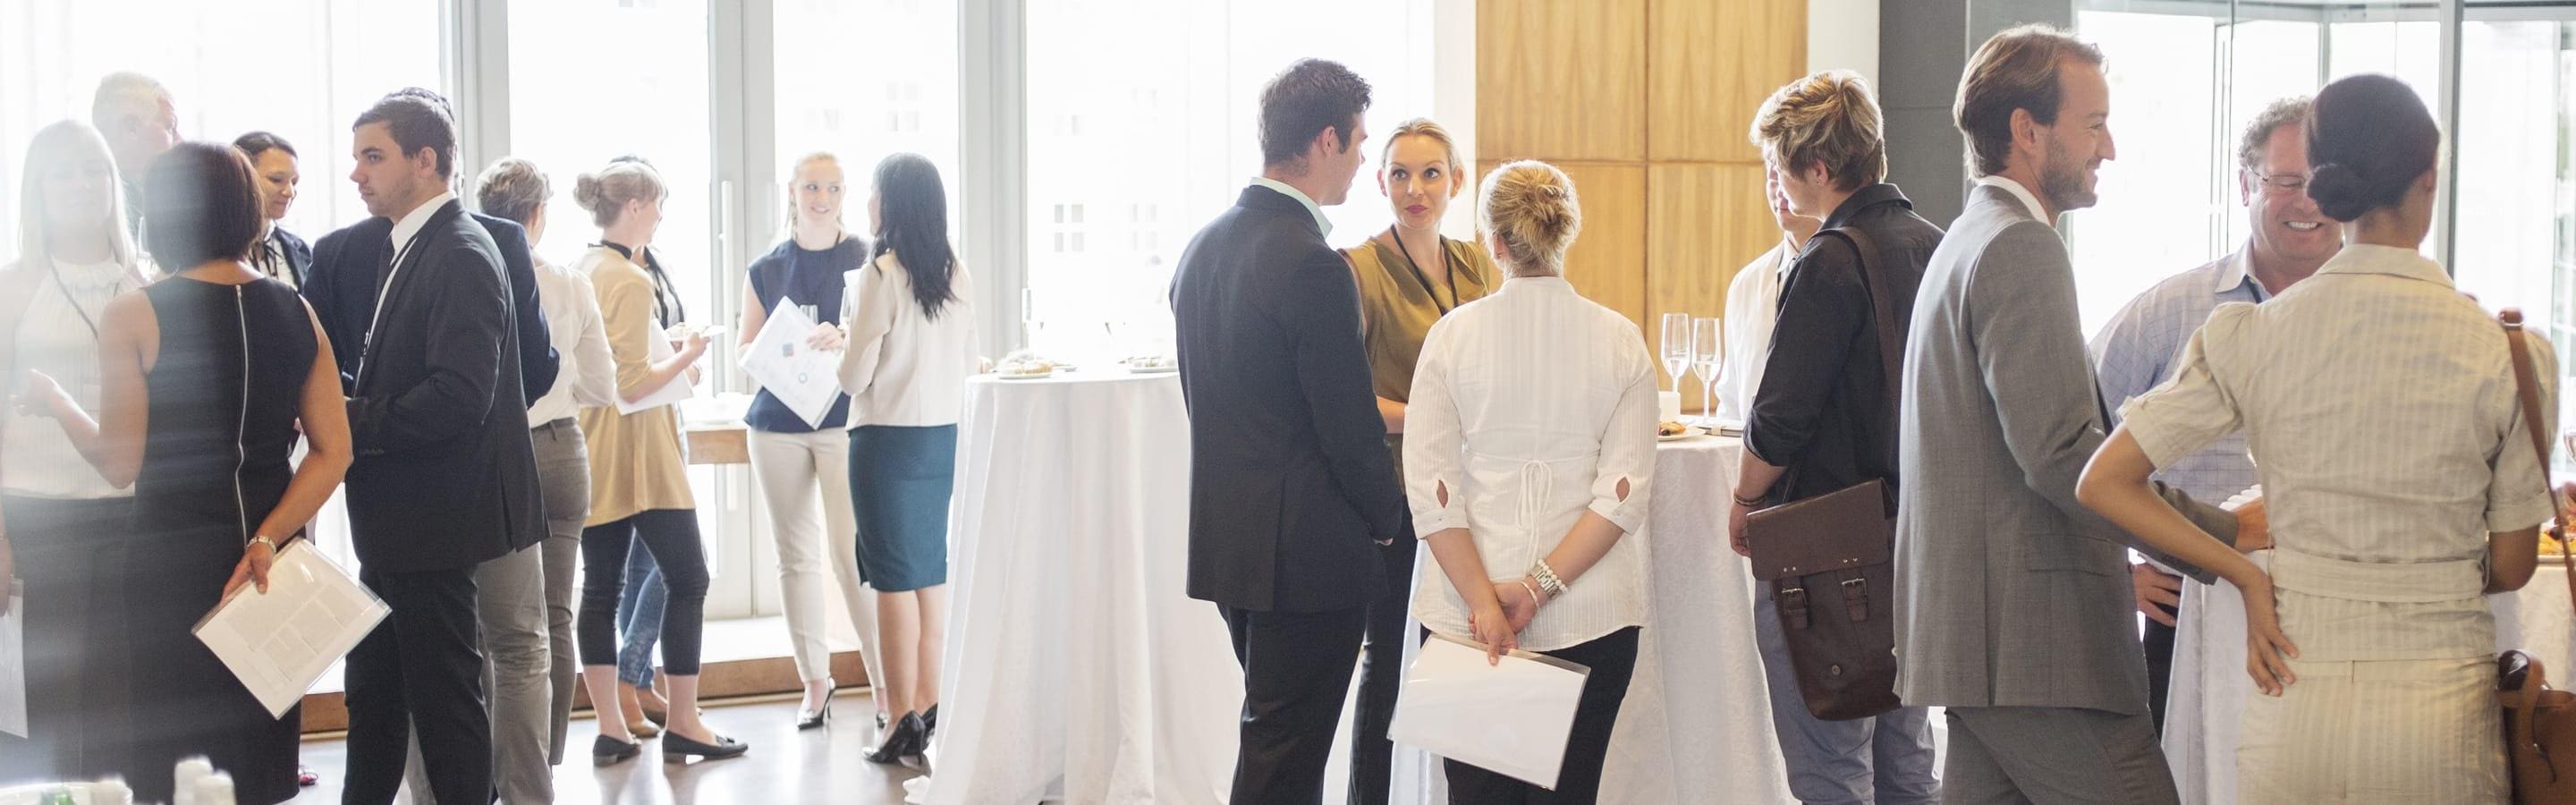 Male and female employees networking in an open space